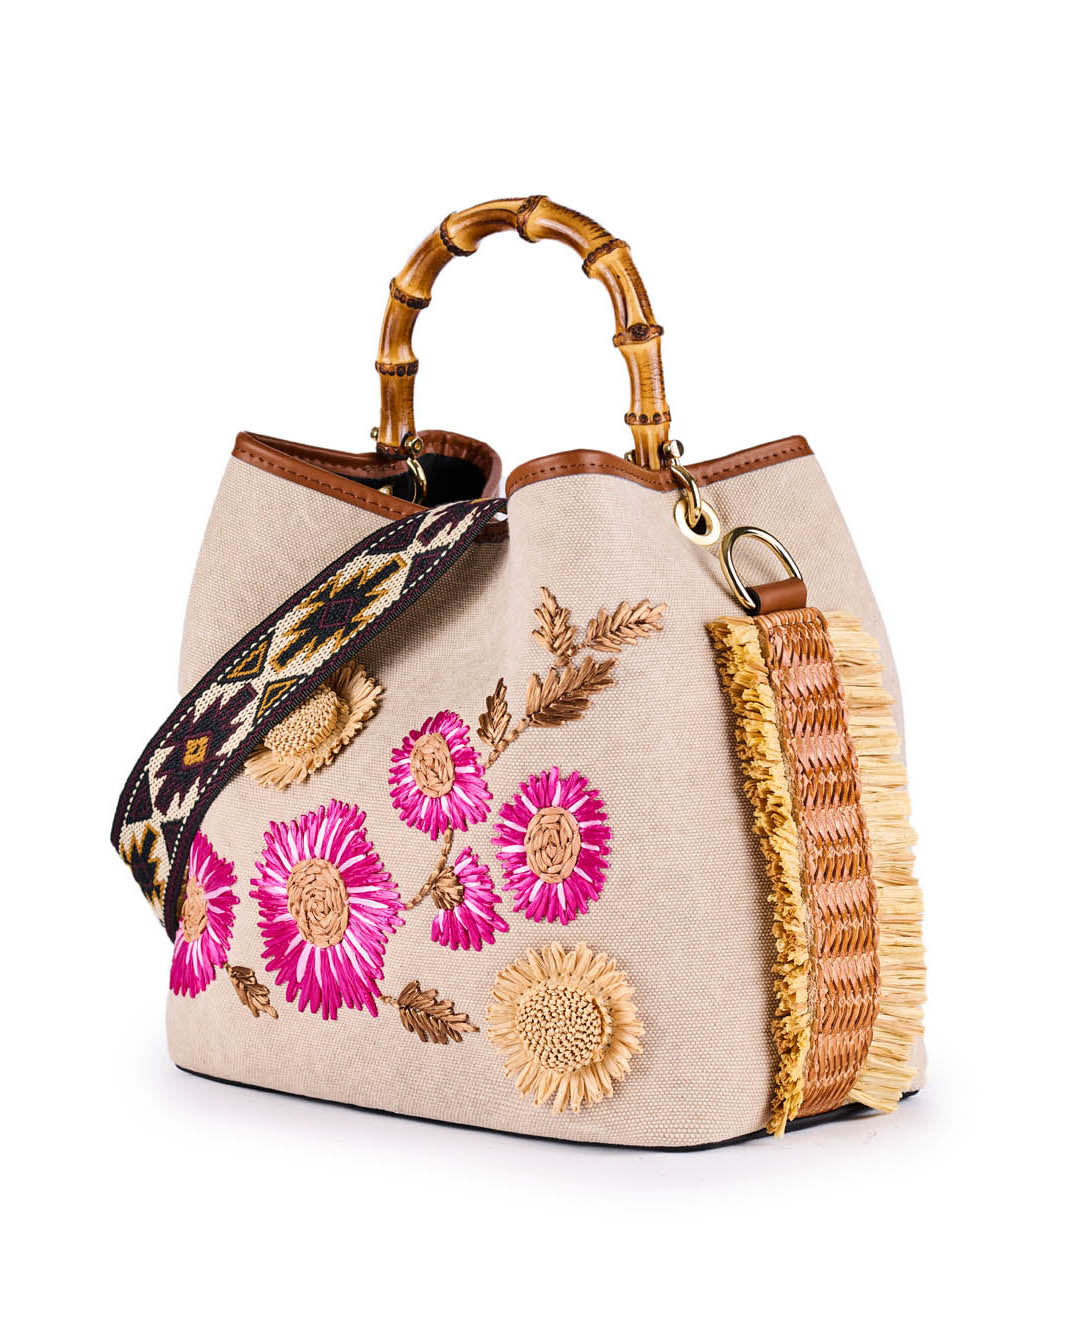 Embroidered floral handbag with bamboo handles and woven strap